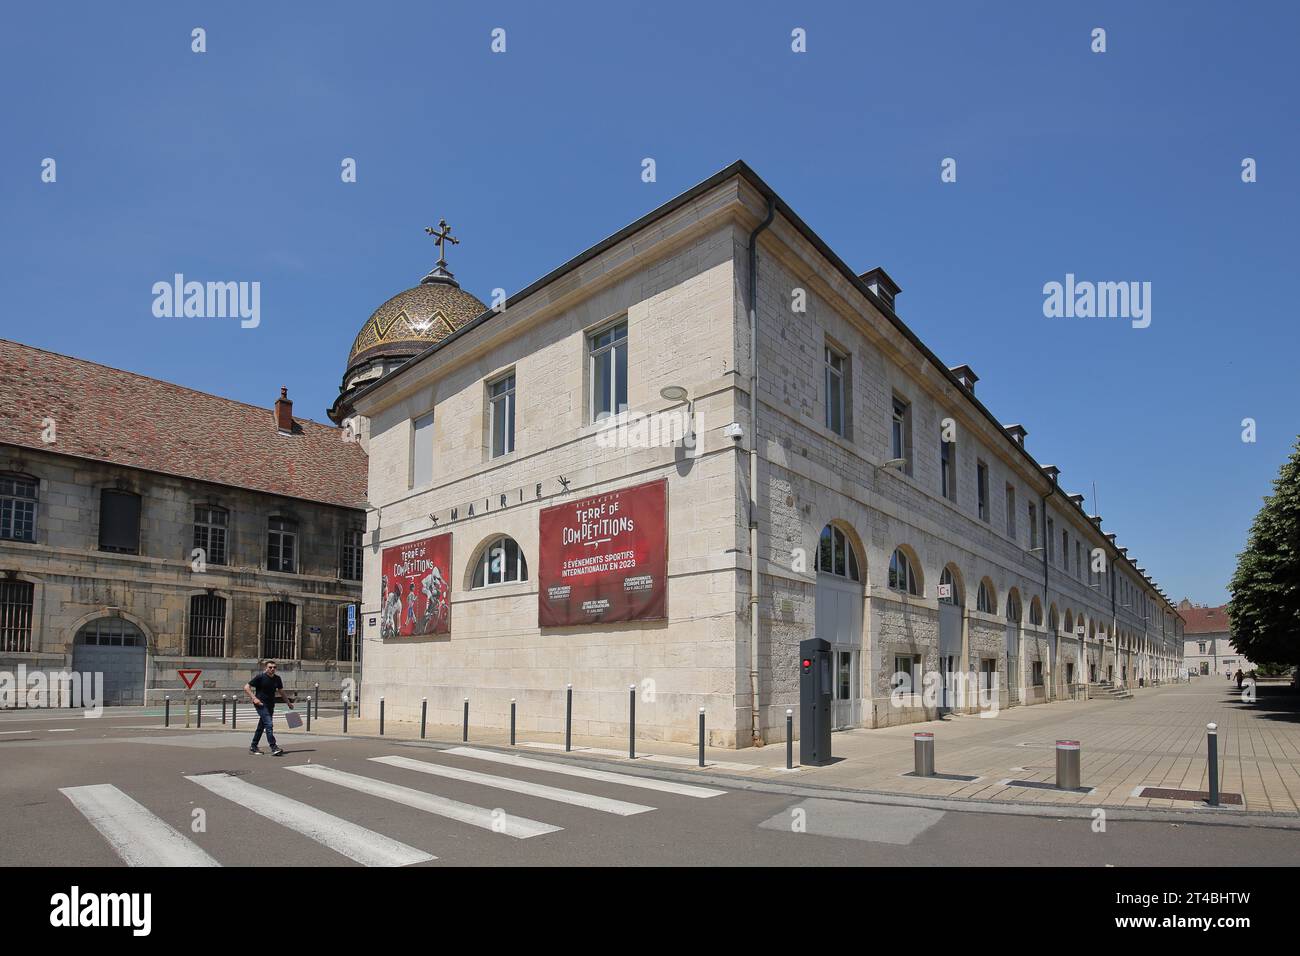 Mairie building, city administration, town hall, Besancon, Besancon, Doubs, France Stock Photo